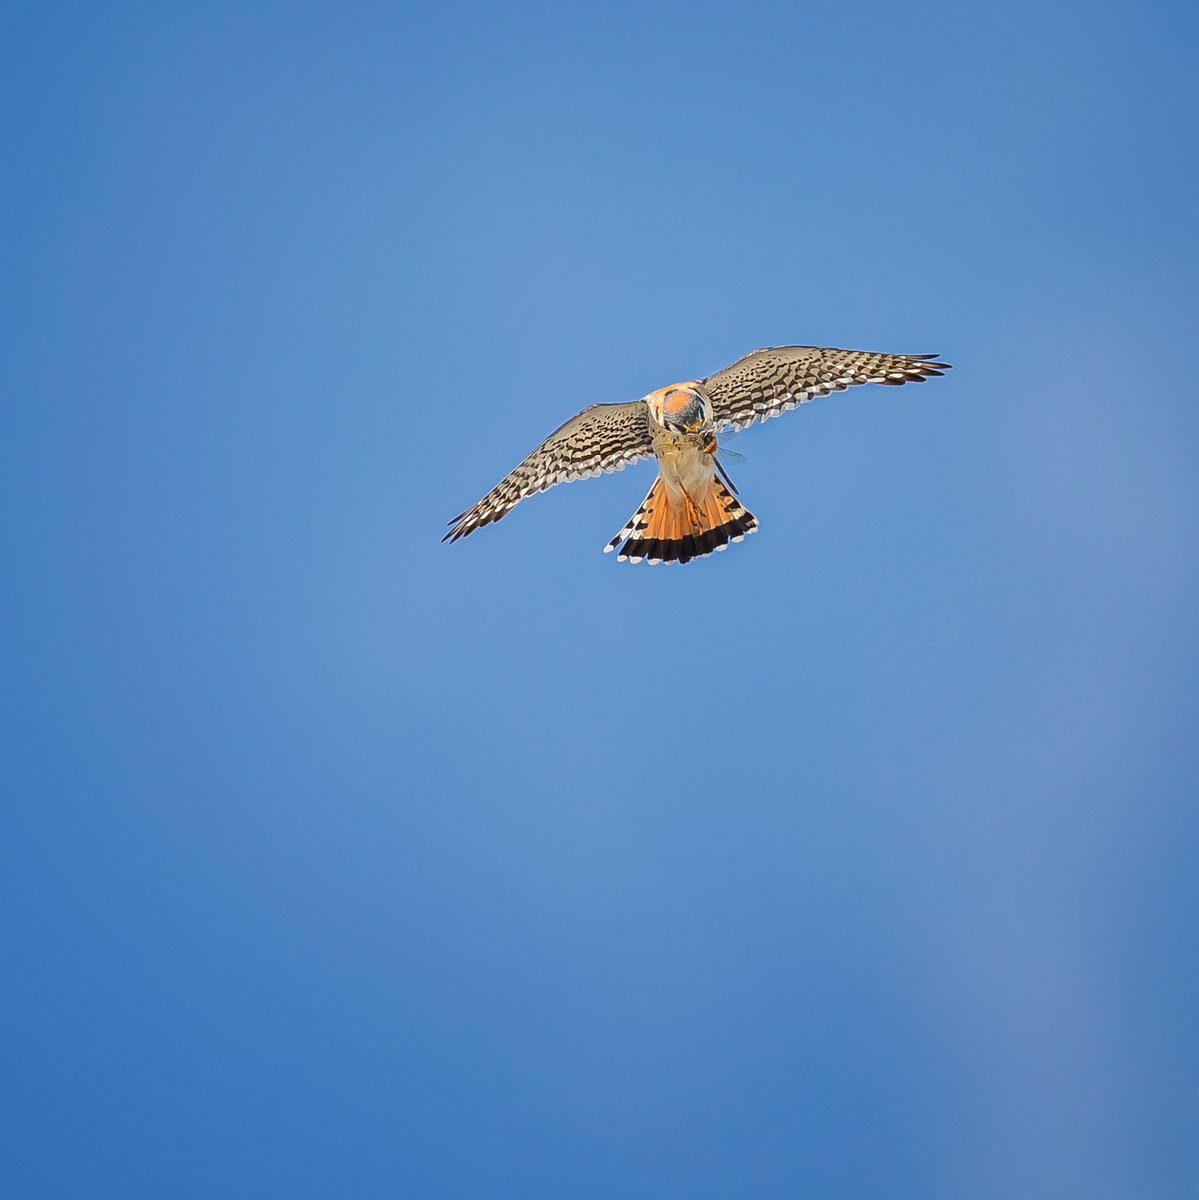 The adult male Kestrel continues to consume his lunch, mid-flight!